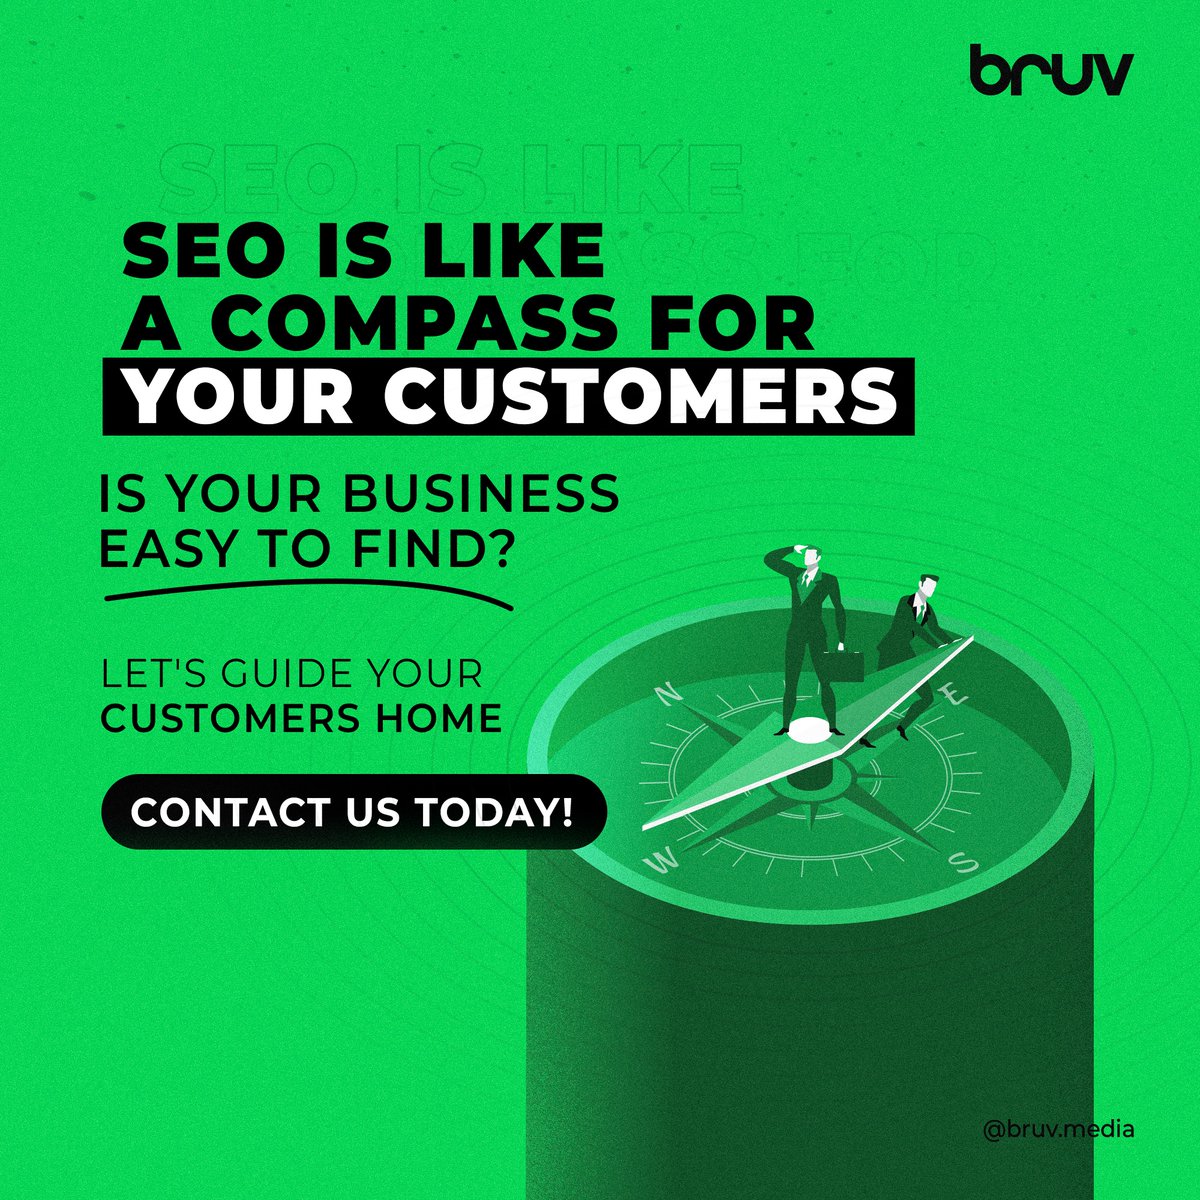 Navigate Your Way to Success! 🧭✨ Discover the Power of SEO and Make Your Business Unmissable. 🚀🔍
#FindYourBrand #ClearPathToSuccess #GuidingCustomersHome #SEOExpertise #UnmissableBusiness #BoostVisibility #BruvMedia